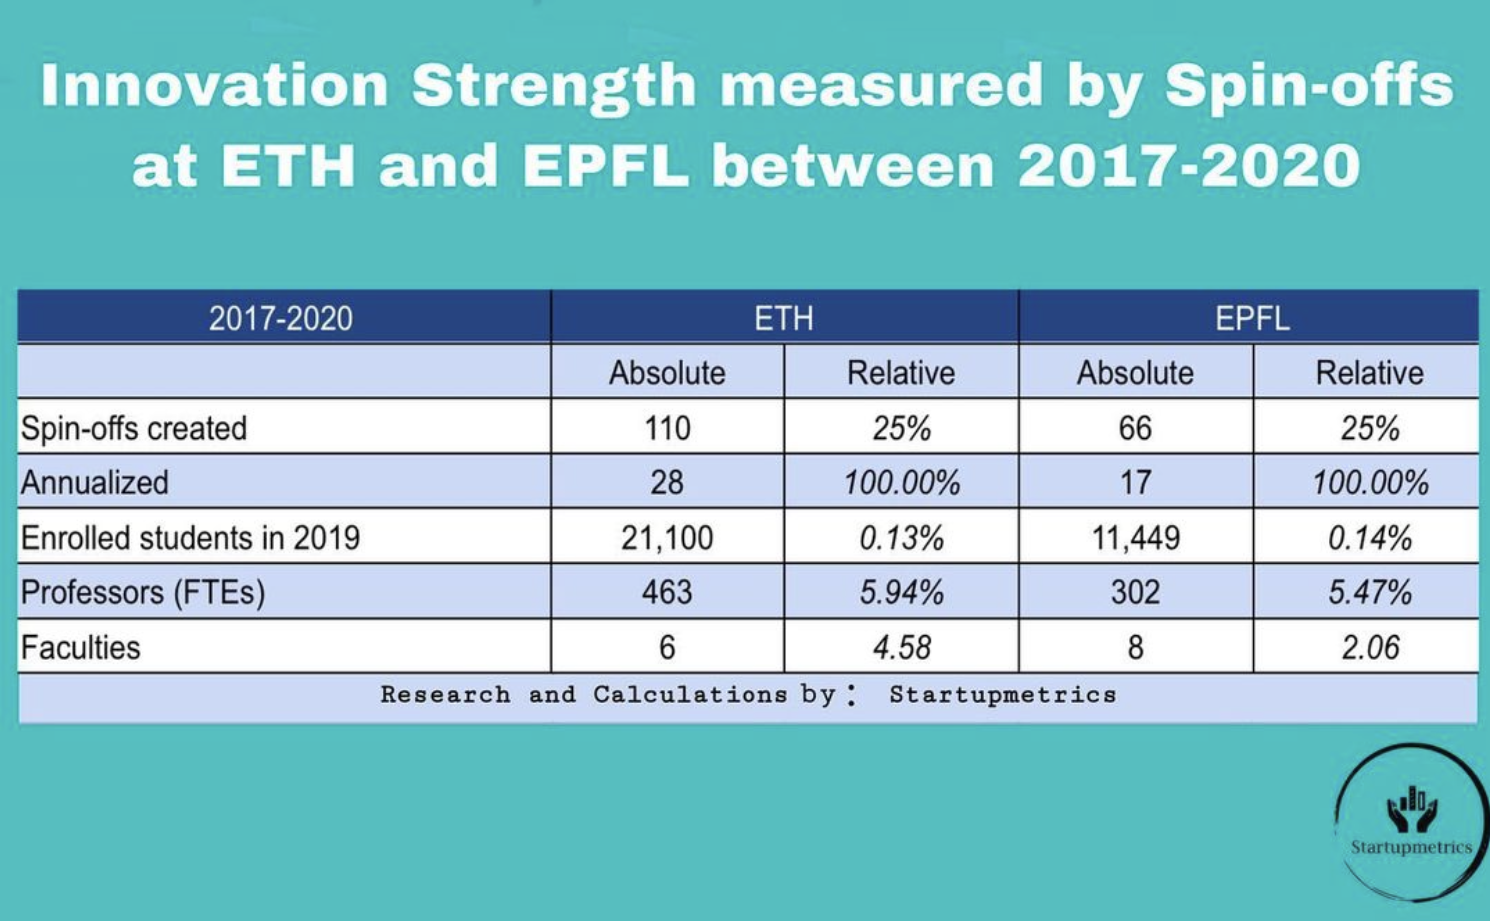 Innovation strength measured by spin-offs at ETH and EPFL between 2017-2020